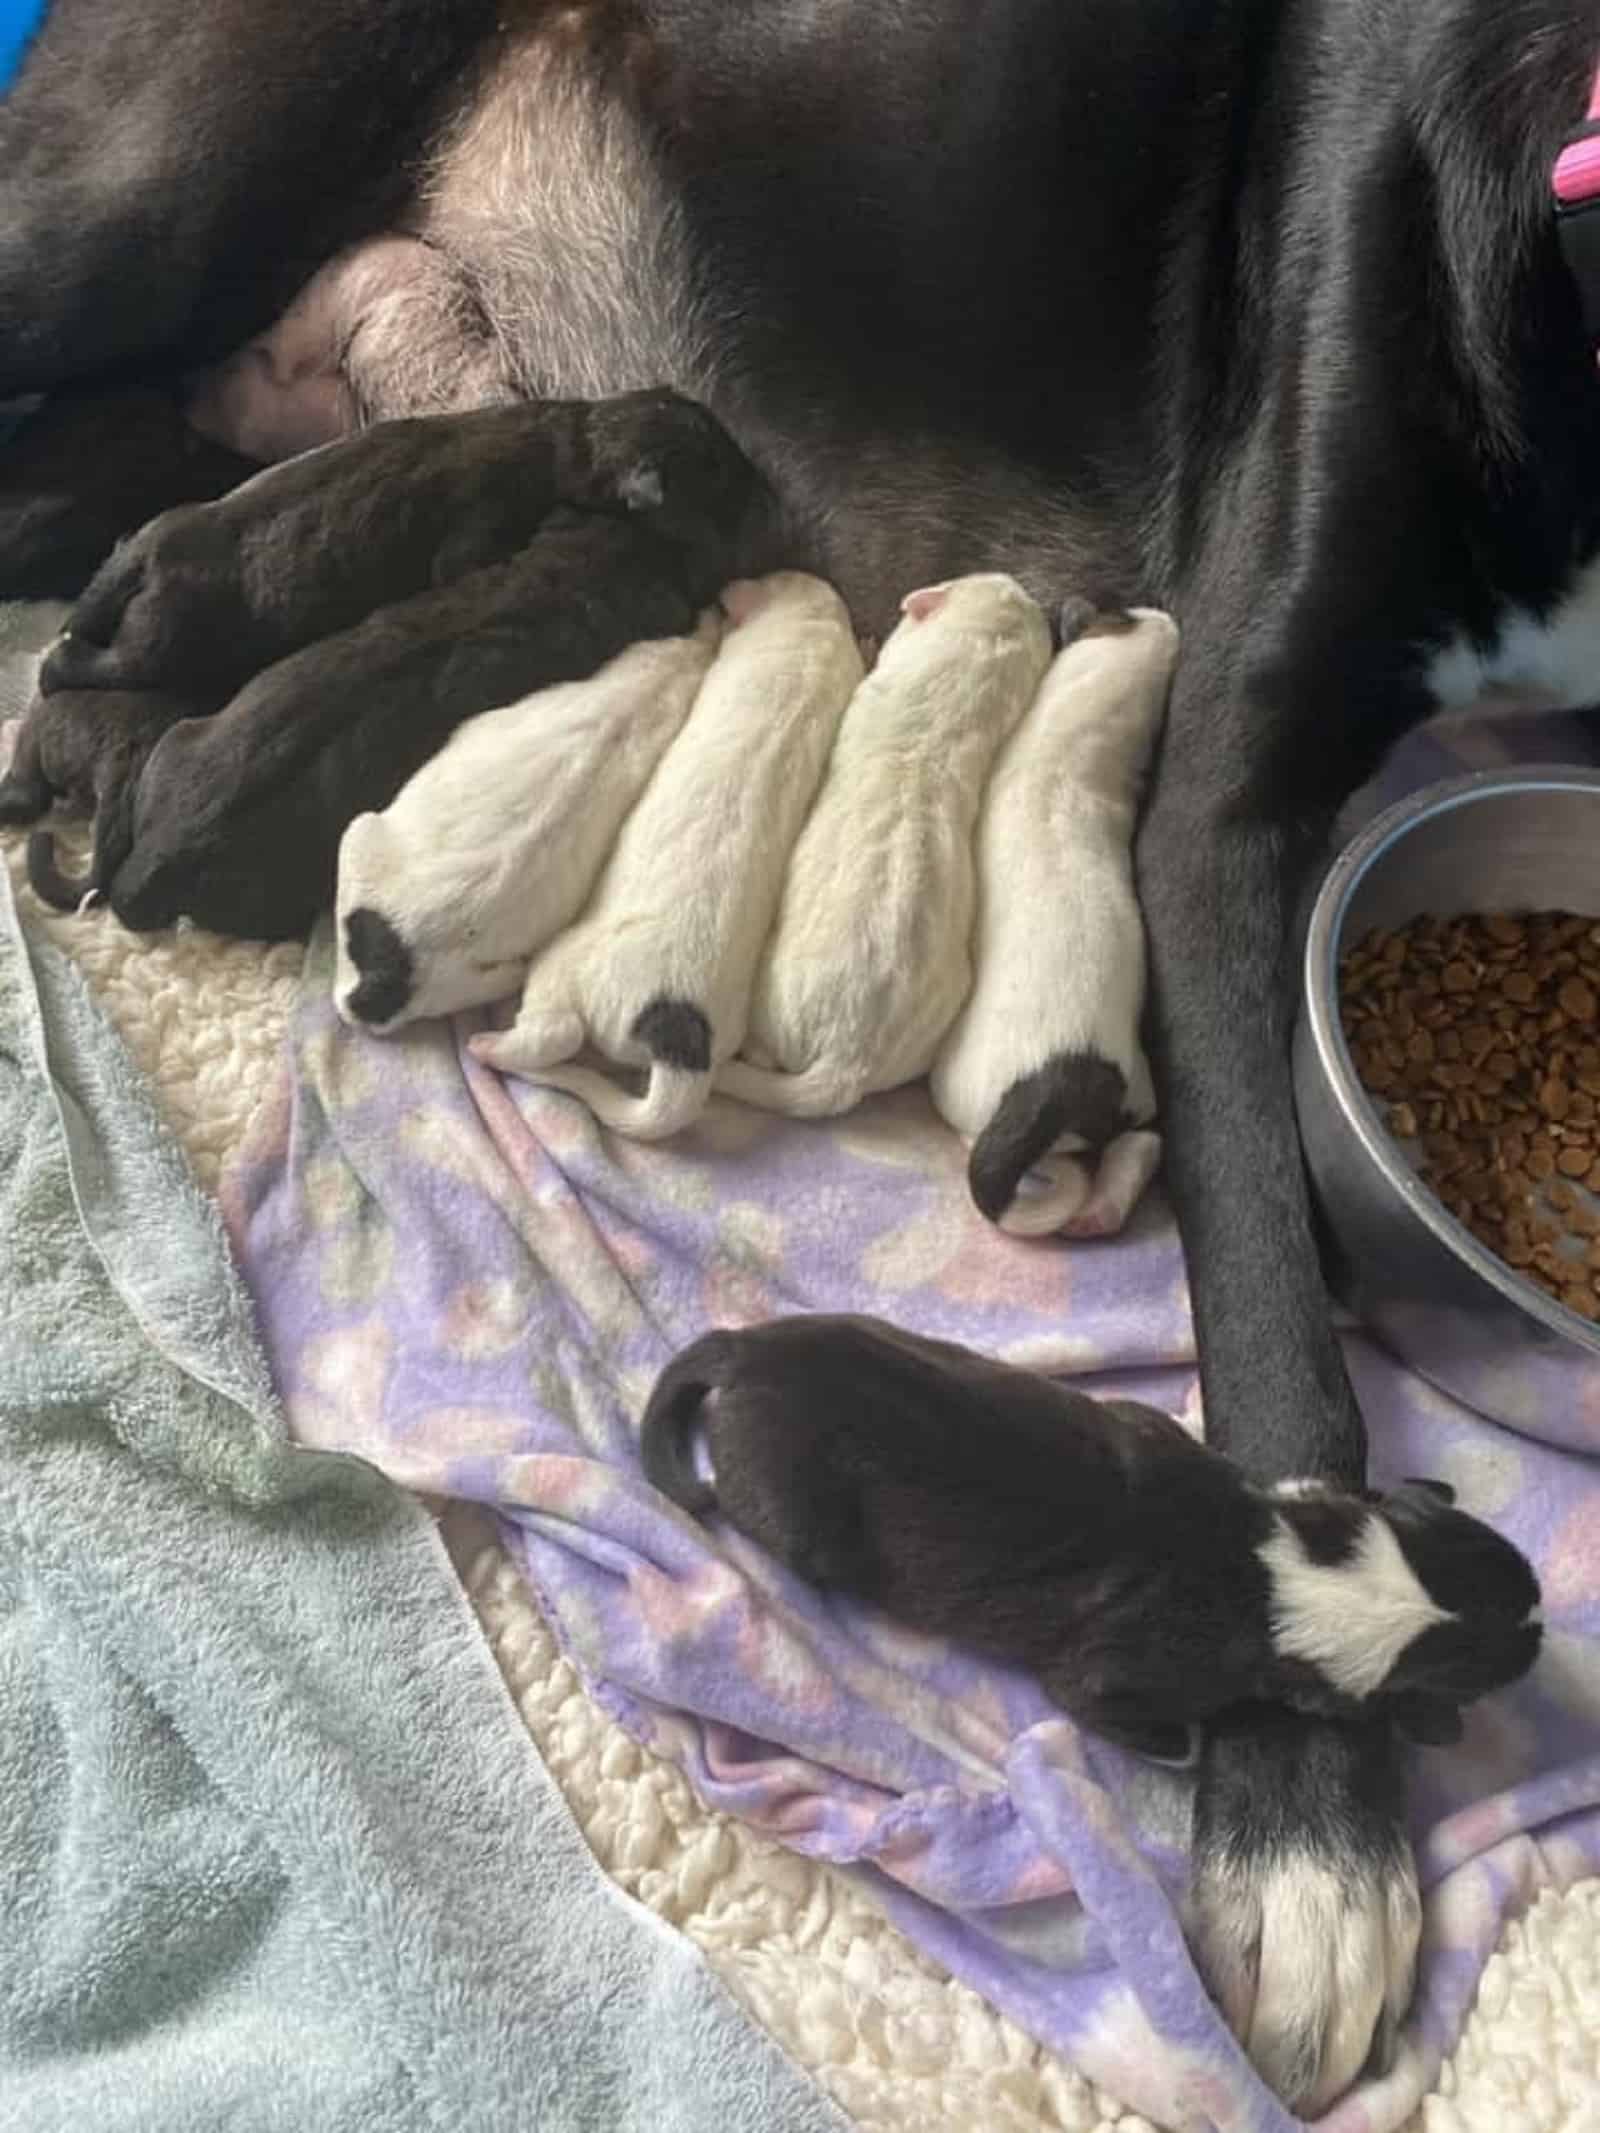 mama great dane nursing her puppies while one puppy lying on her paw